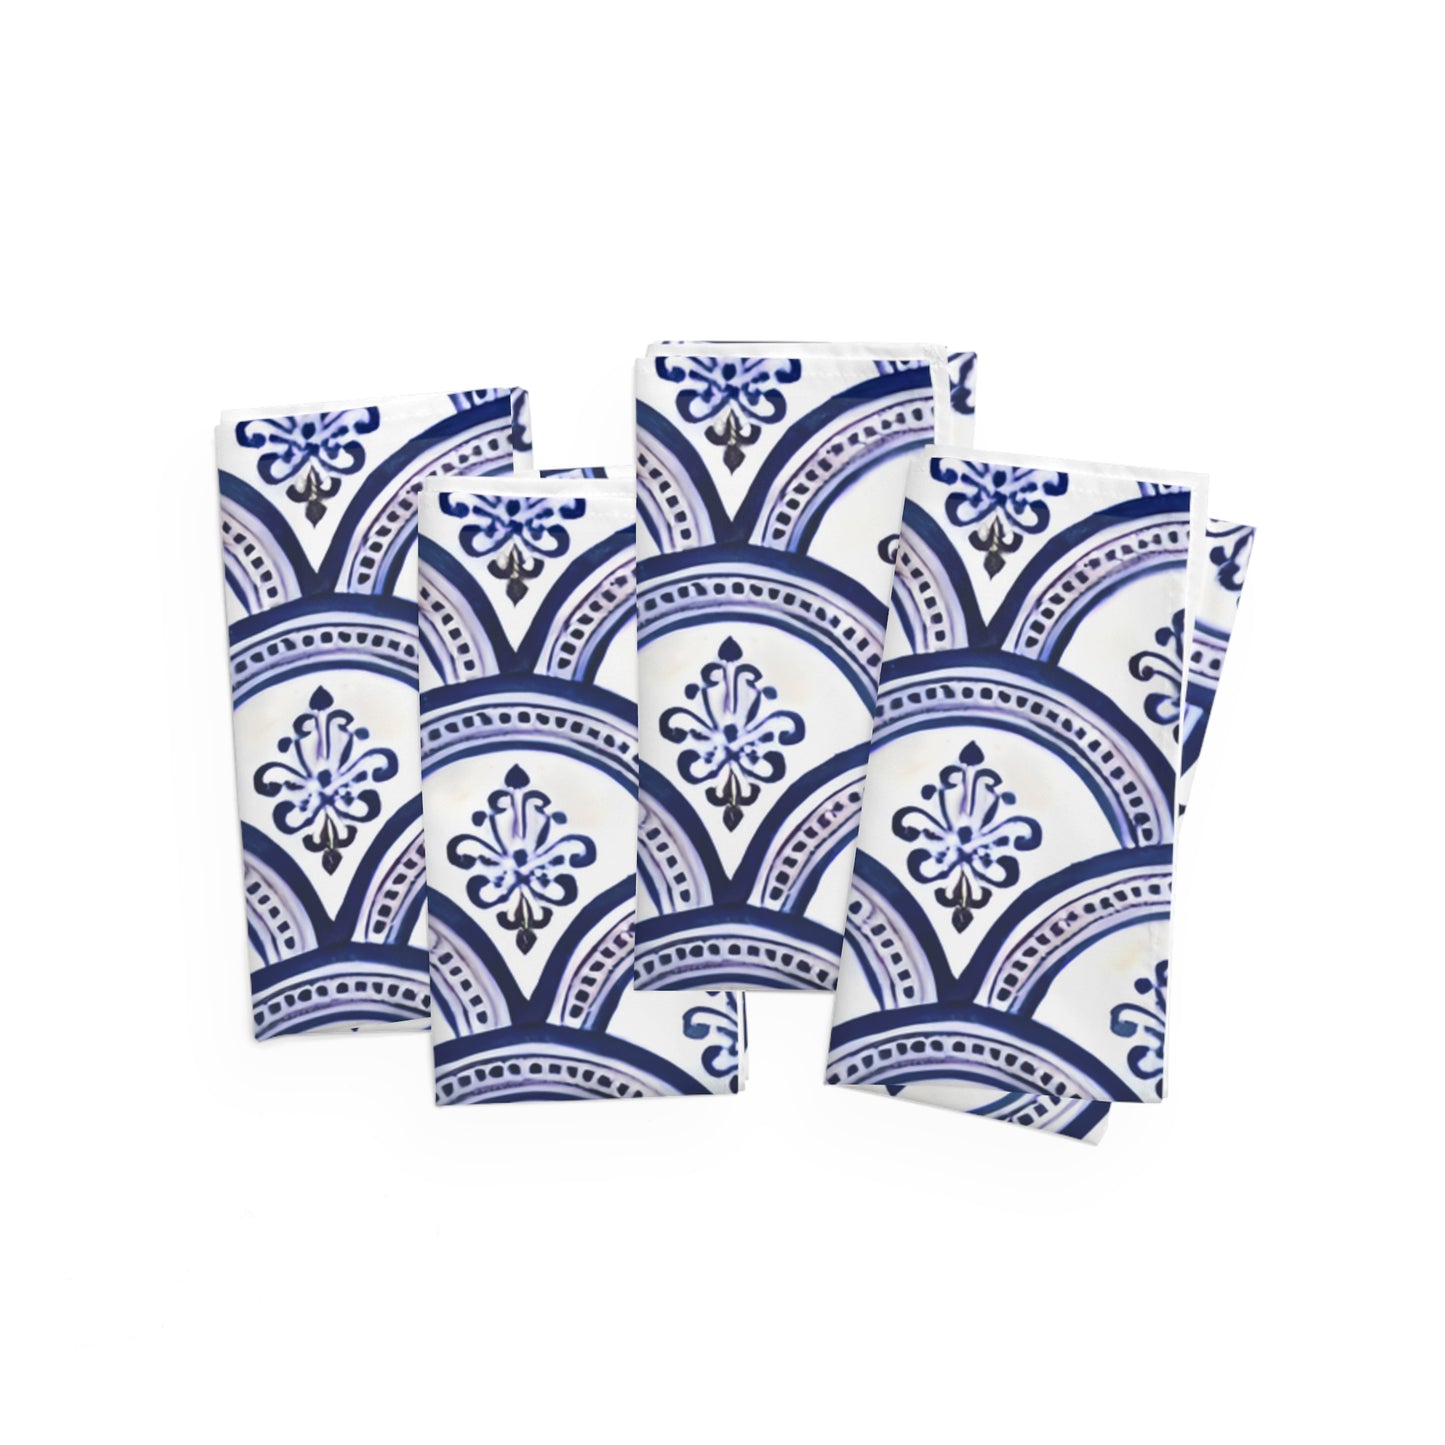 Napkins SOGNO D'AMALFI by Italian Summers, made to order, Mediterranean style, inspired by the Maiolica domes of the enchanted Coast of Amalfi